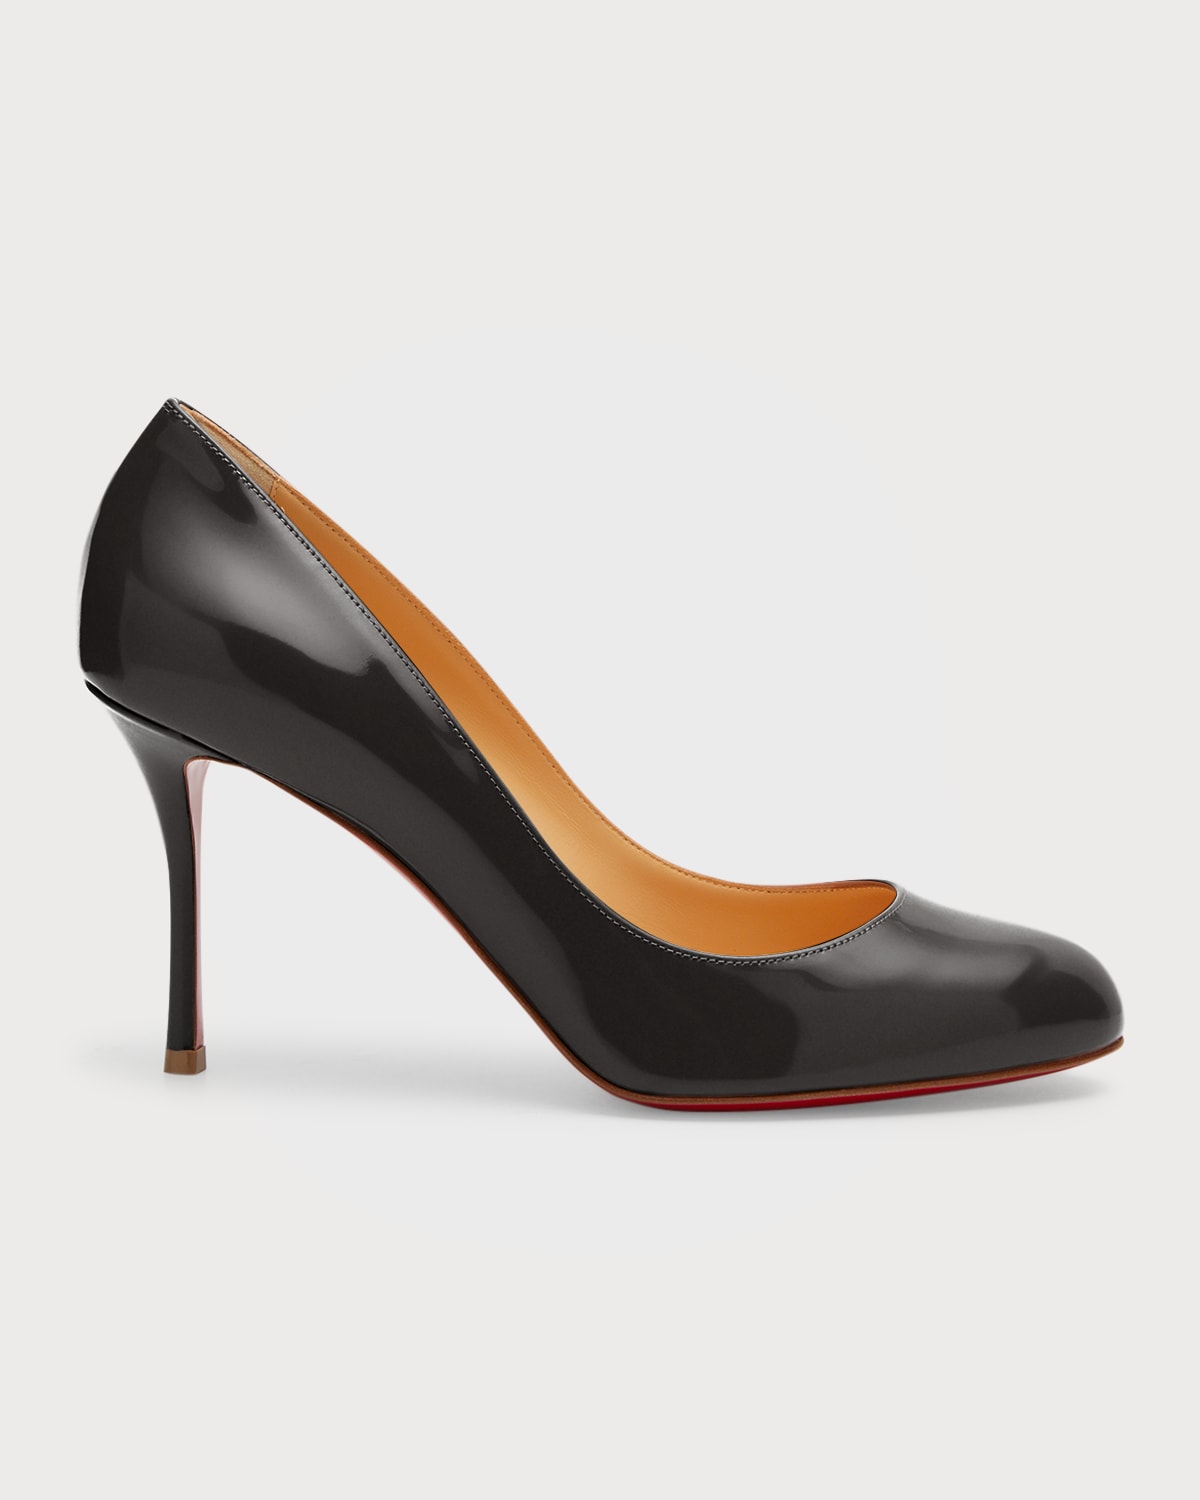 Christian Louboutin Dolly Patent Red Sole Pumps In Black